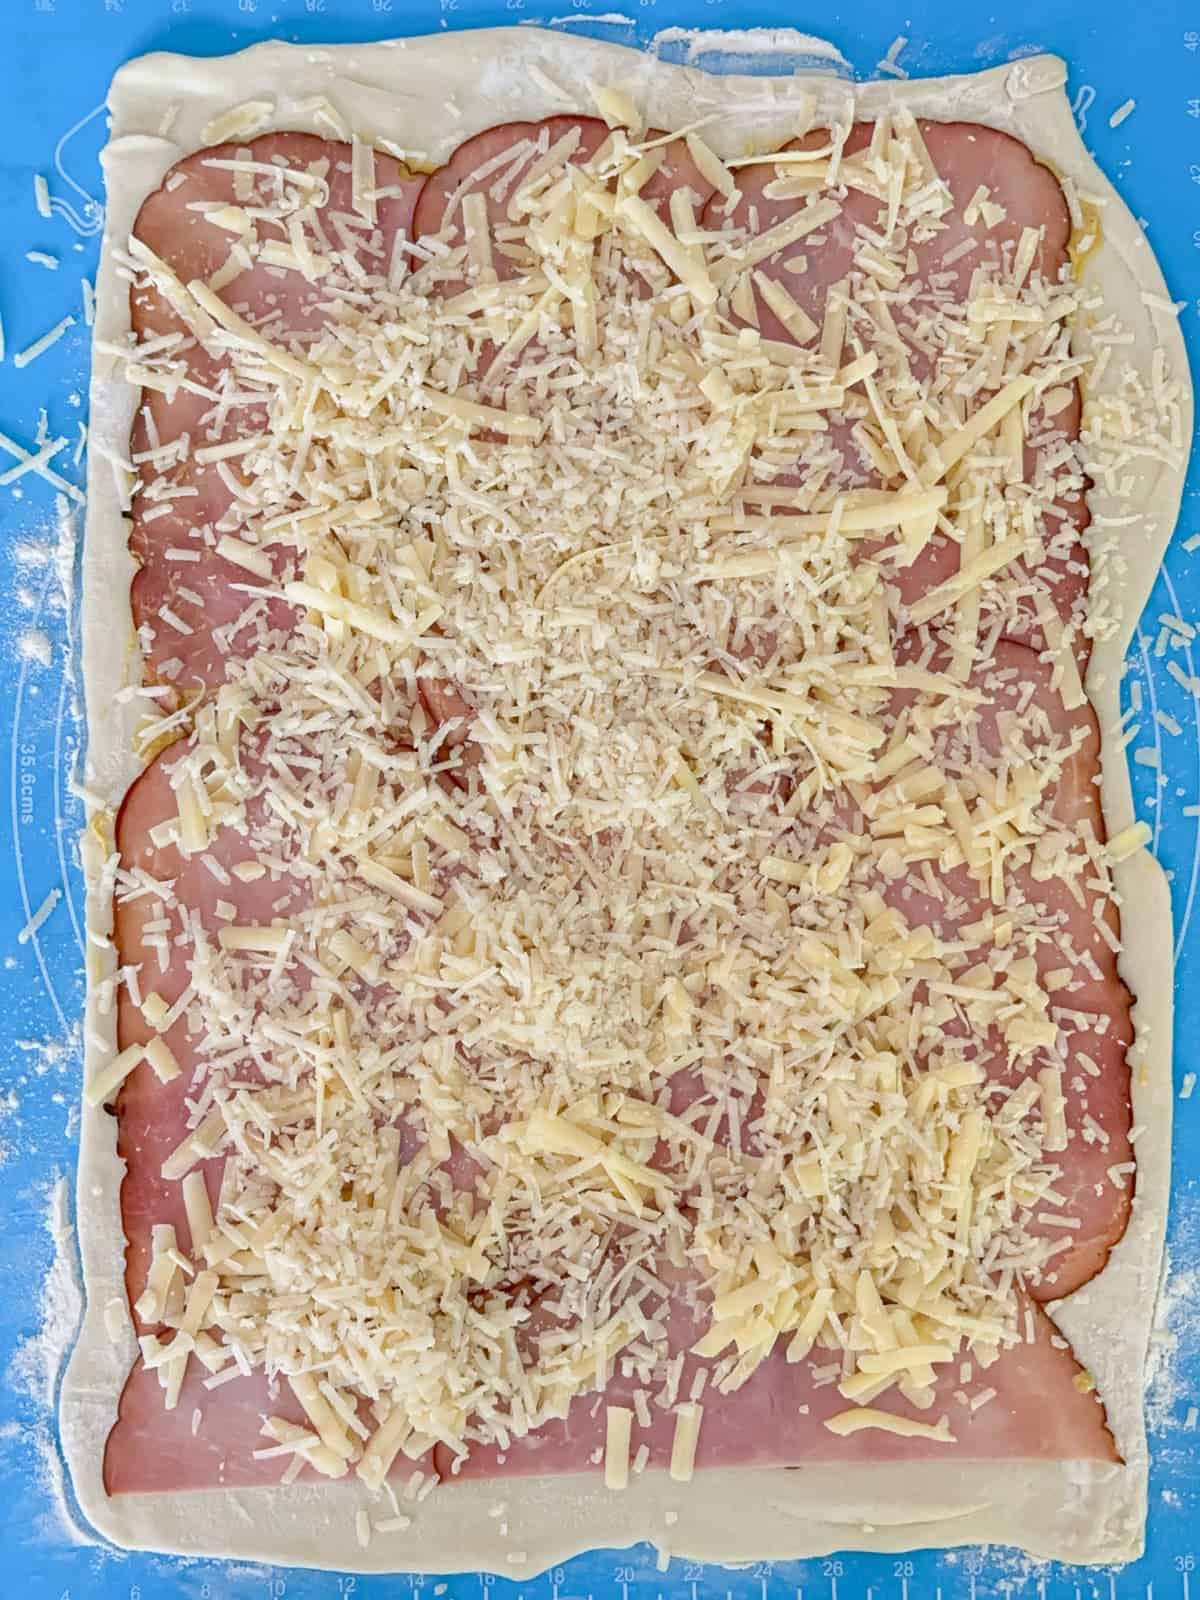 sprinkle the shredded cheese on top of the ham